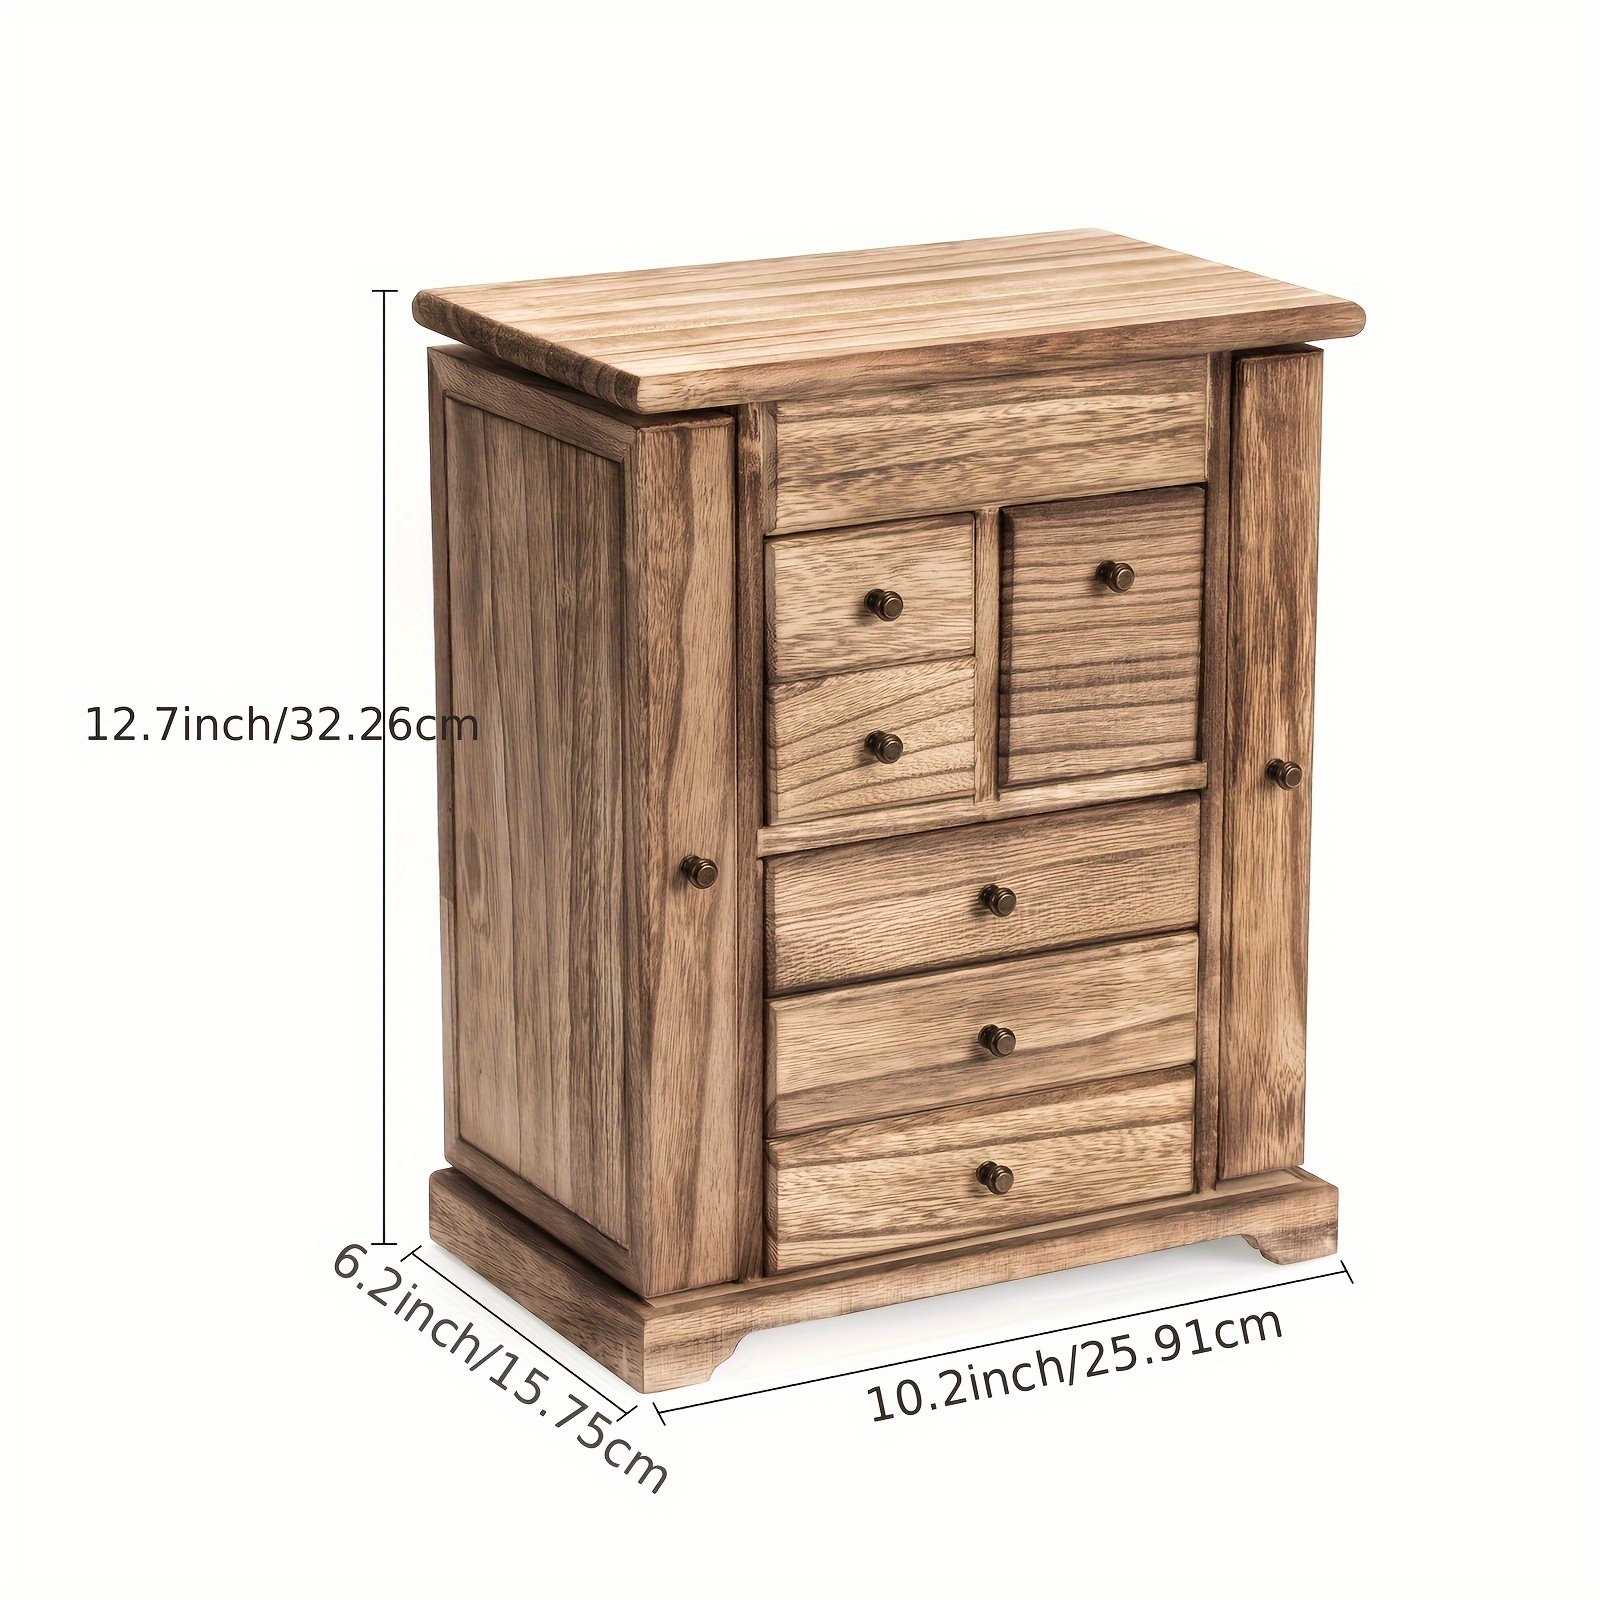 1pc multi layer jewelry wooden storage box with mirror ear stud earring storage container portable storage and organization for desk dresser vanity office bedroom bathroom